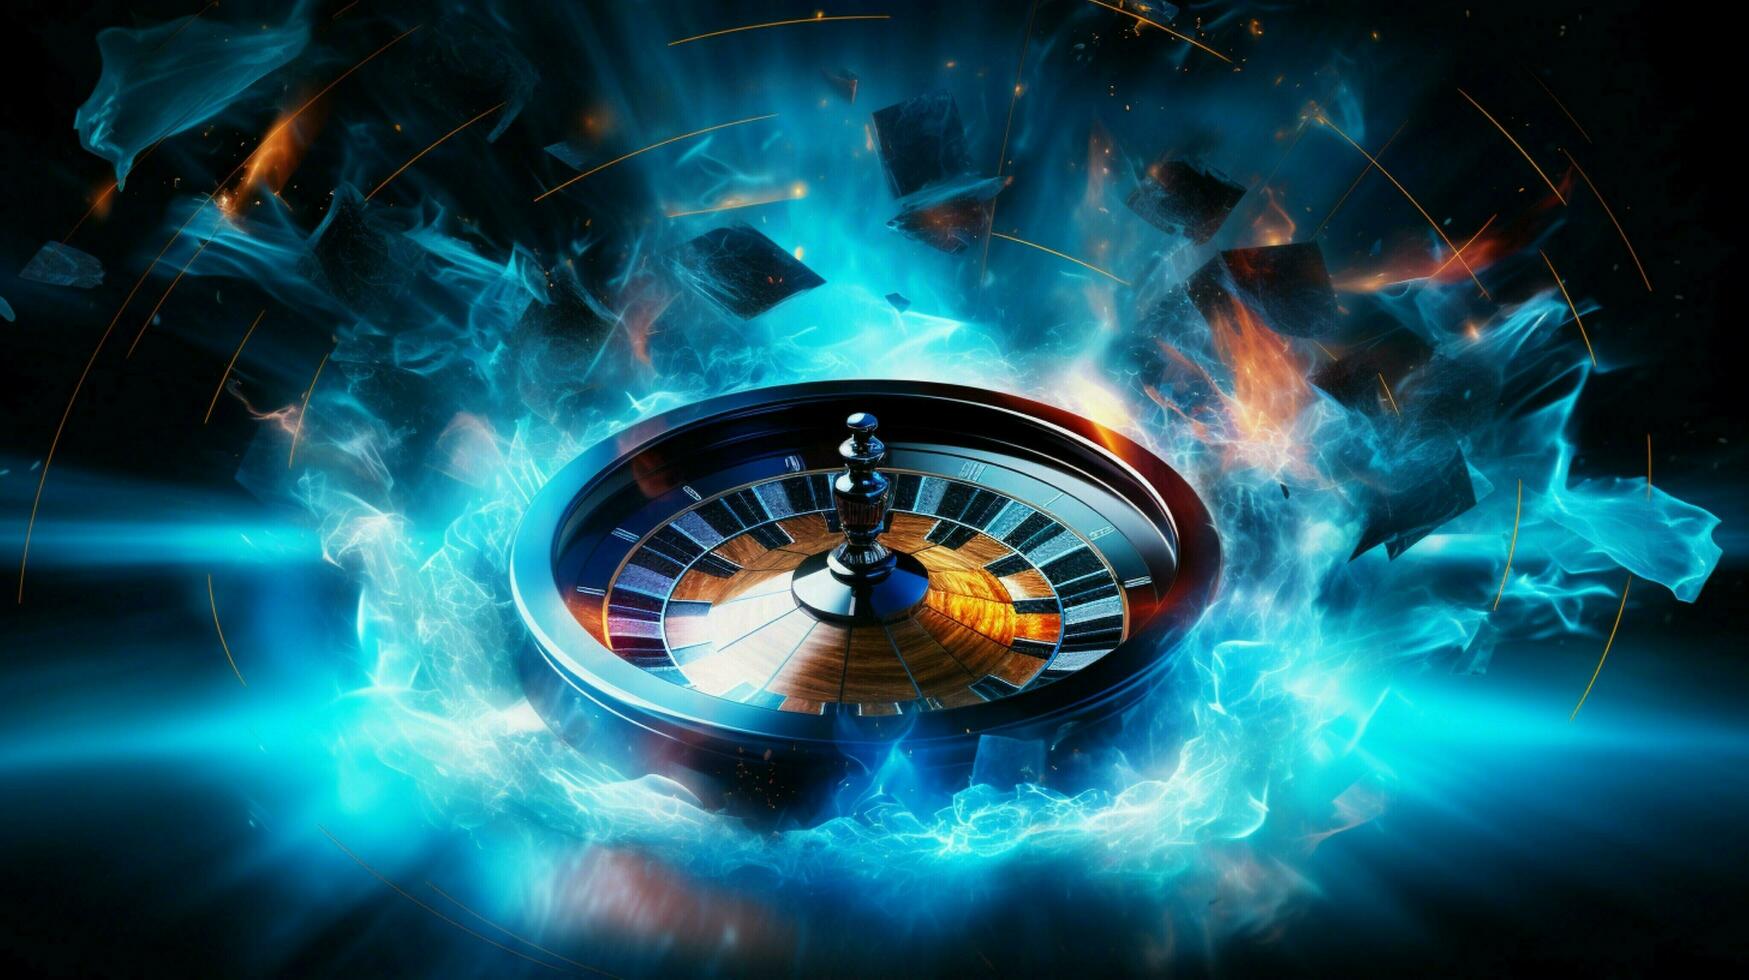 spinning roulette wheel blue flame jackpot casino ultimate photo